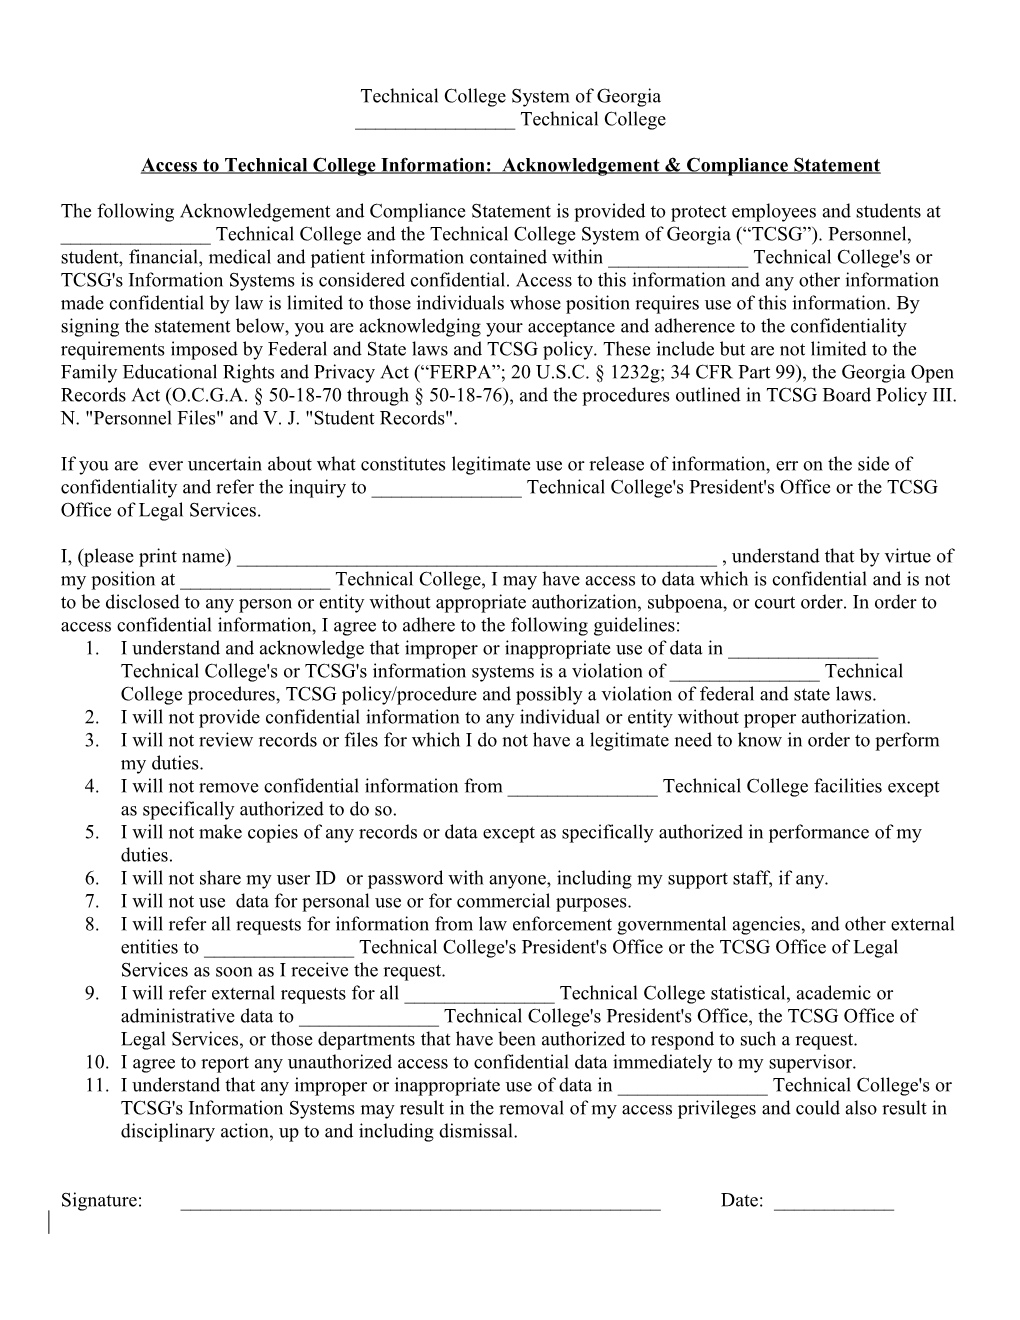 Access to Technical College Information: Acknowledgement & Compliance Statement